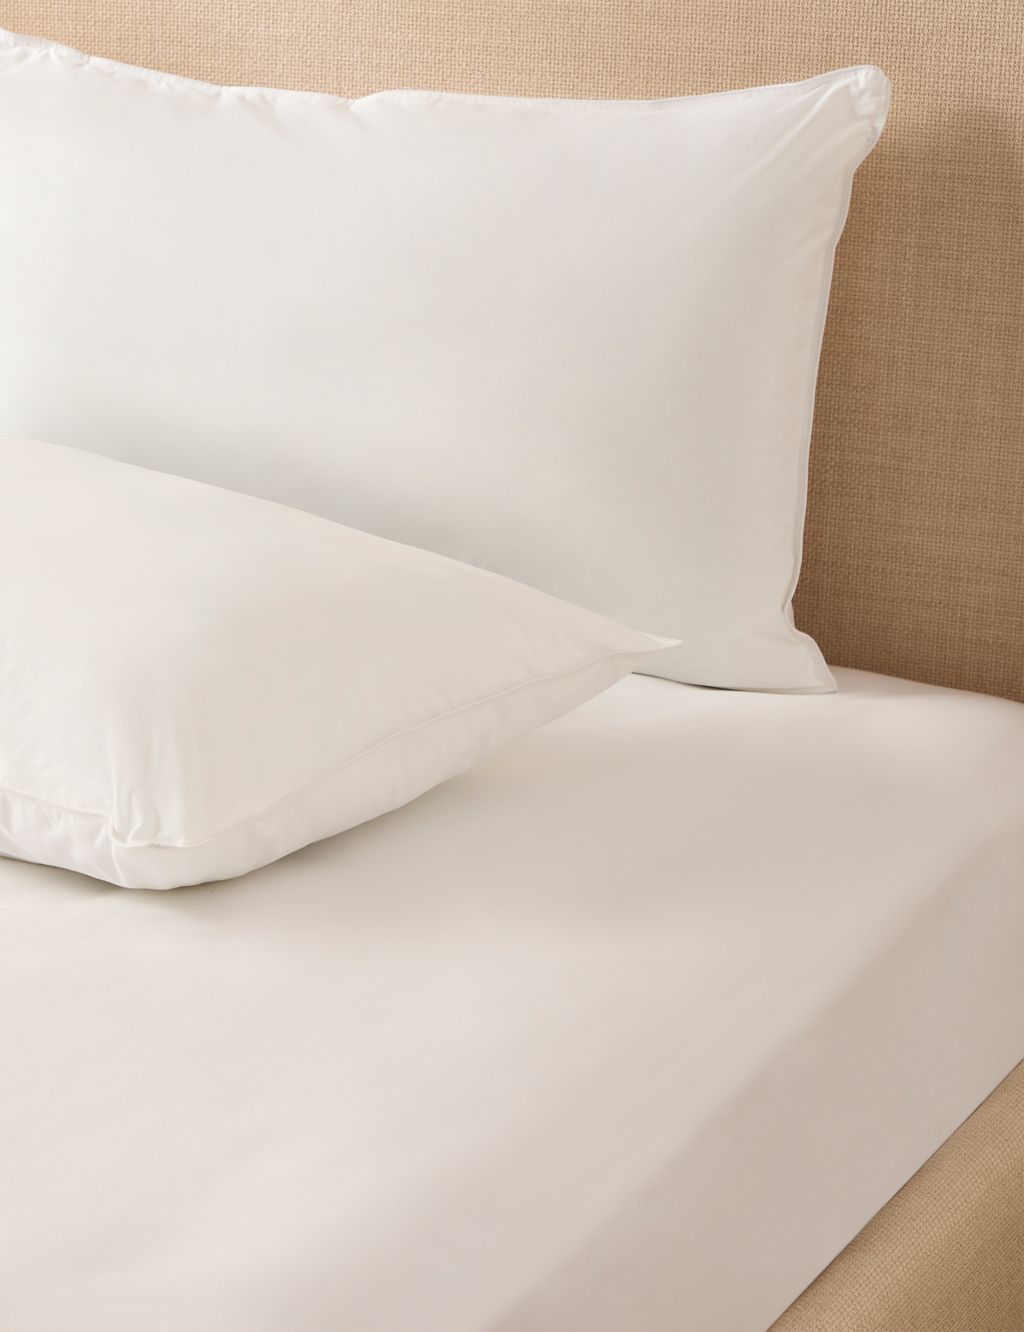 2 Pack Supremely Washable Medium Pillows